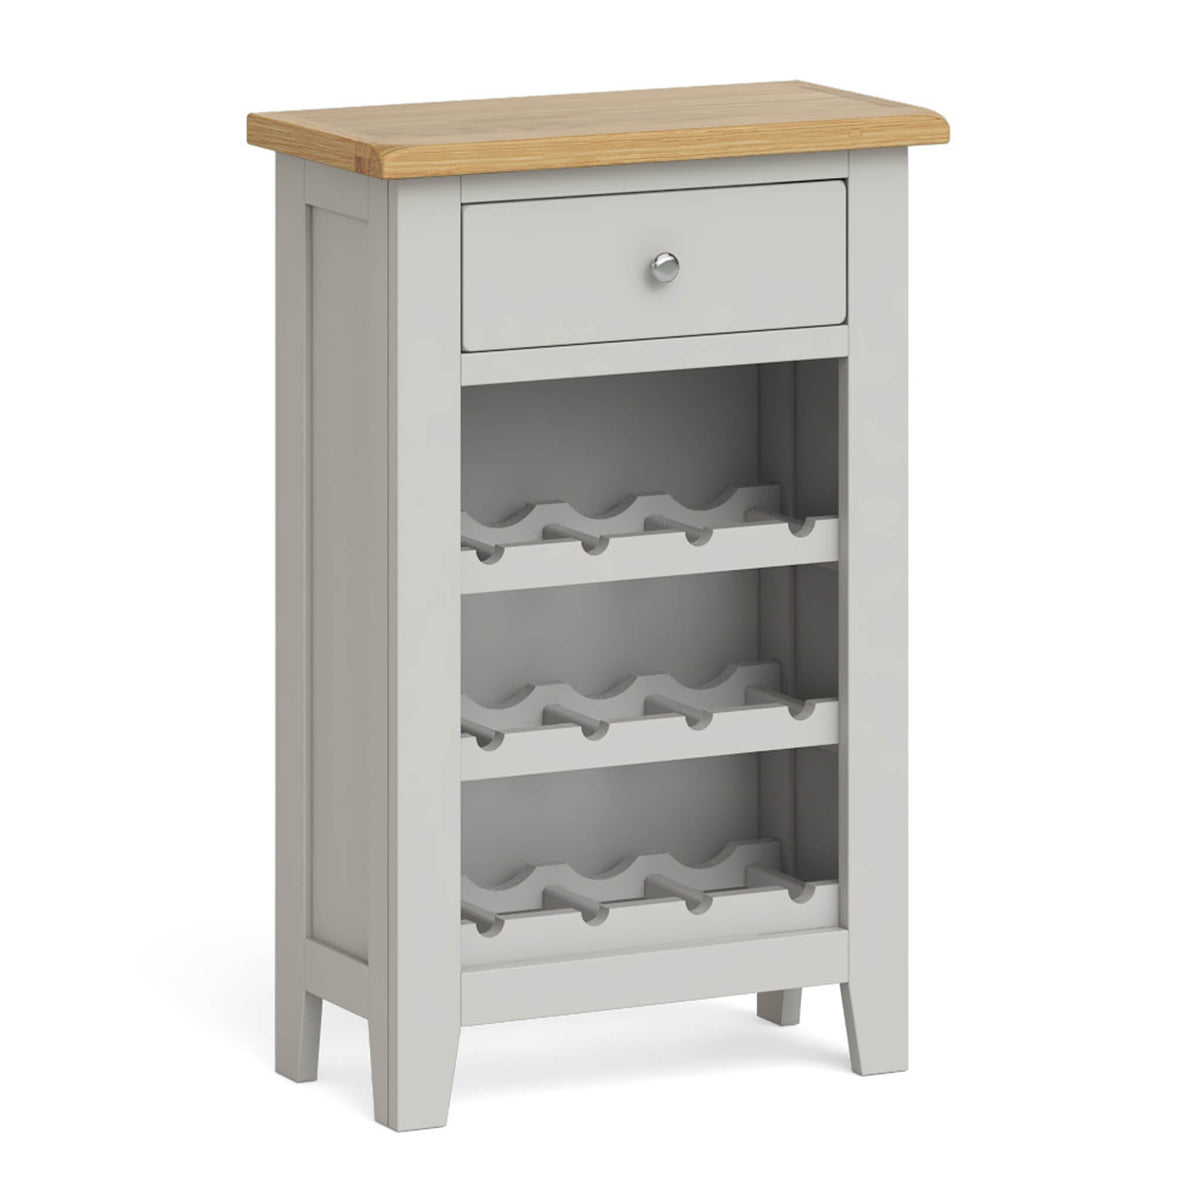 Lundy Grey Wine Rack Cabinet by Roseland Furniture